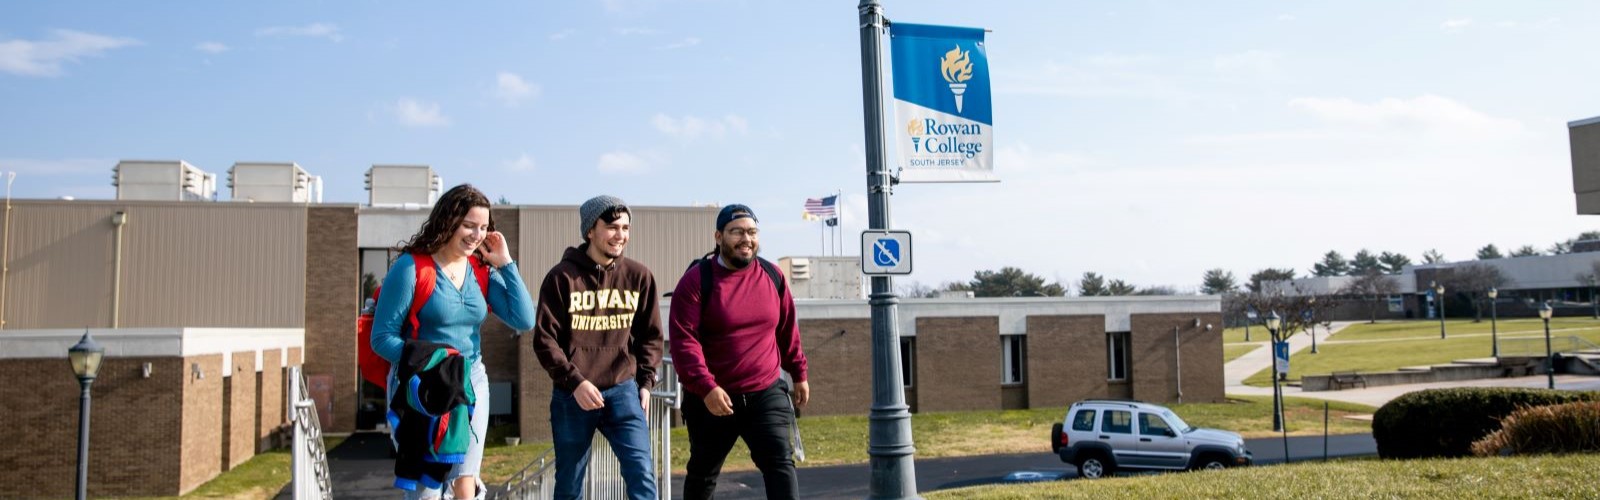 Three students walking around Rowan College of South Jersey campus.